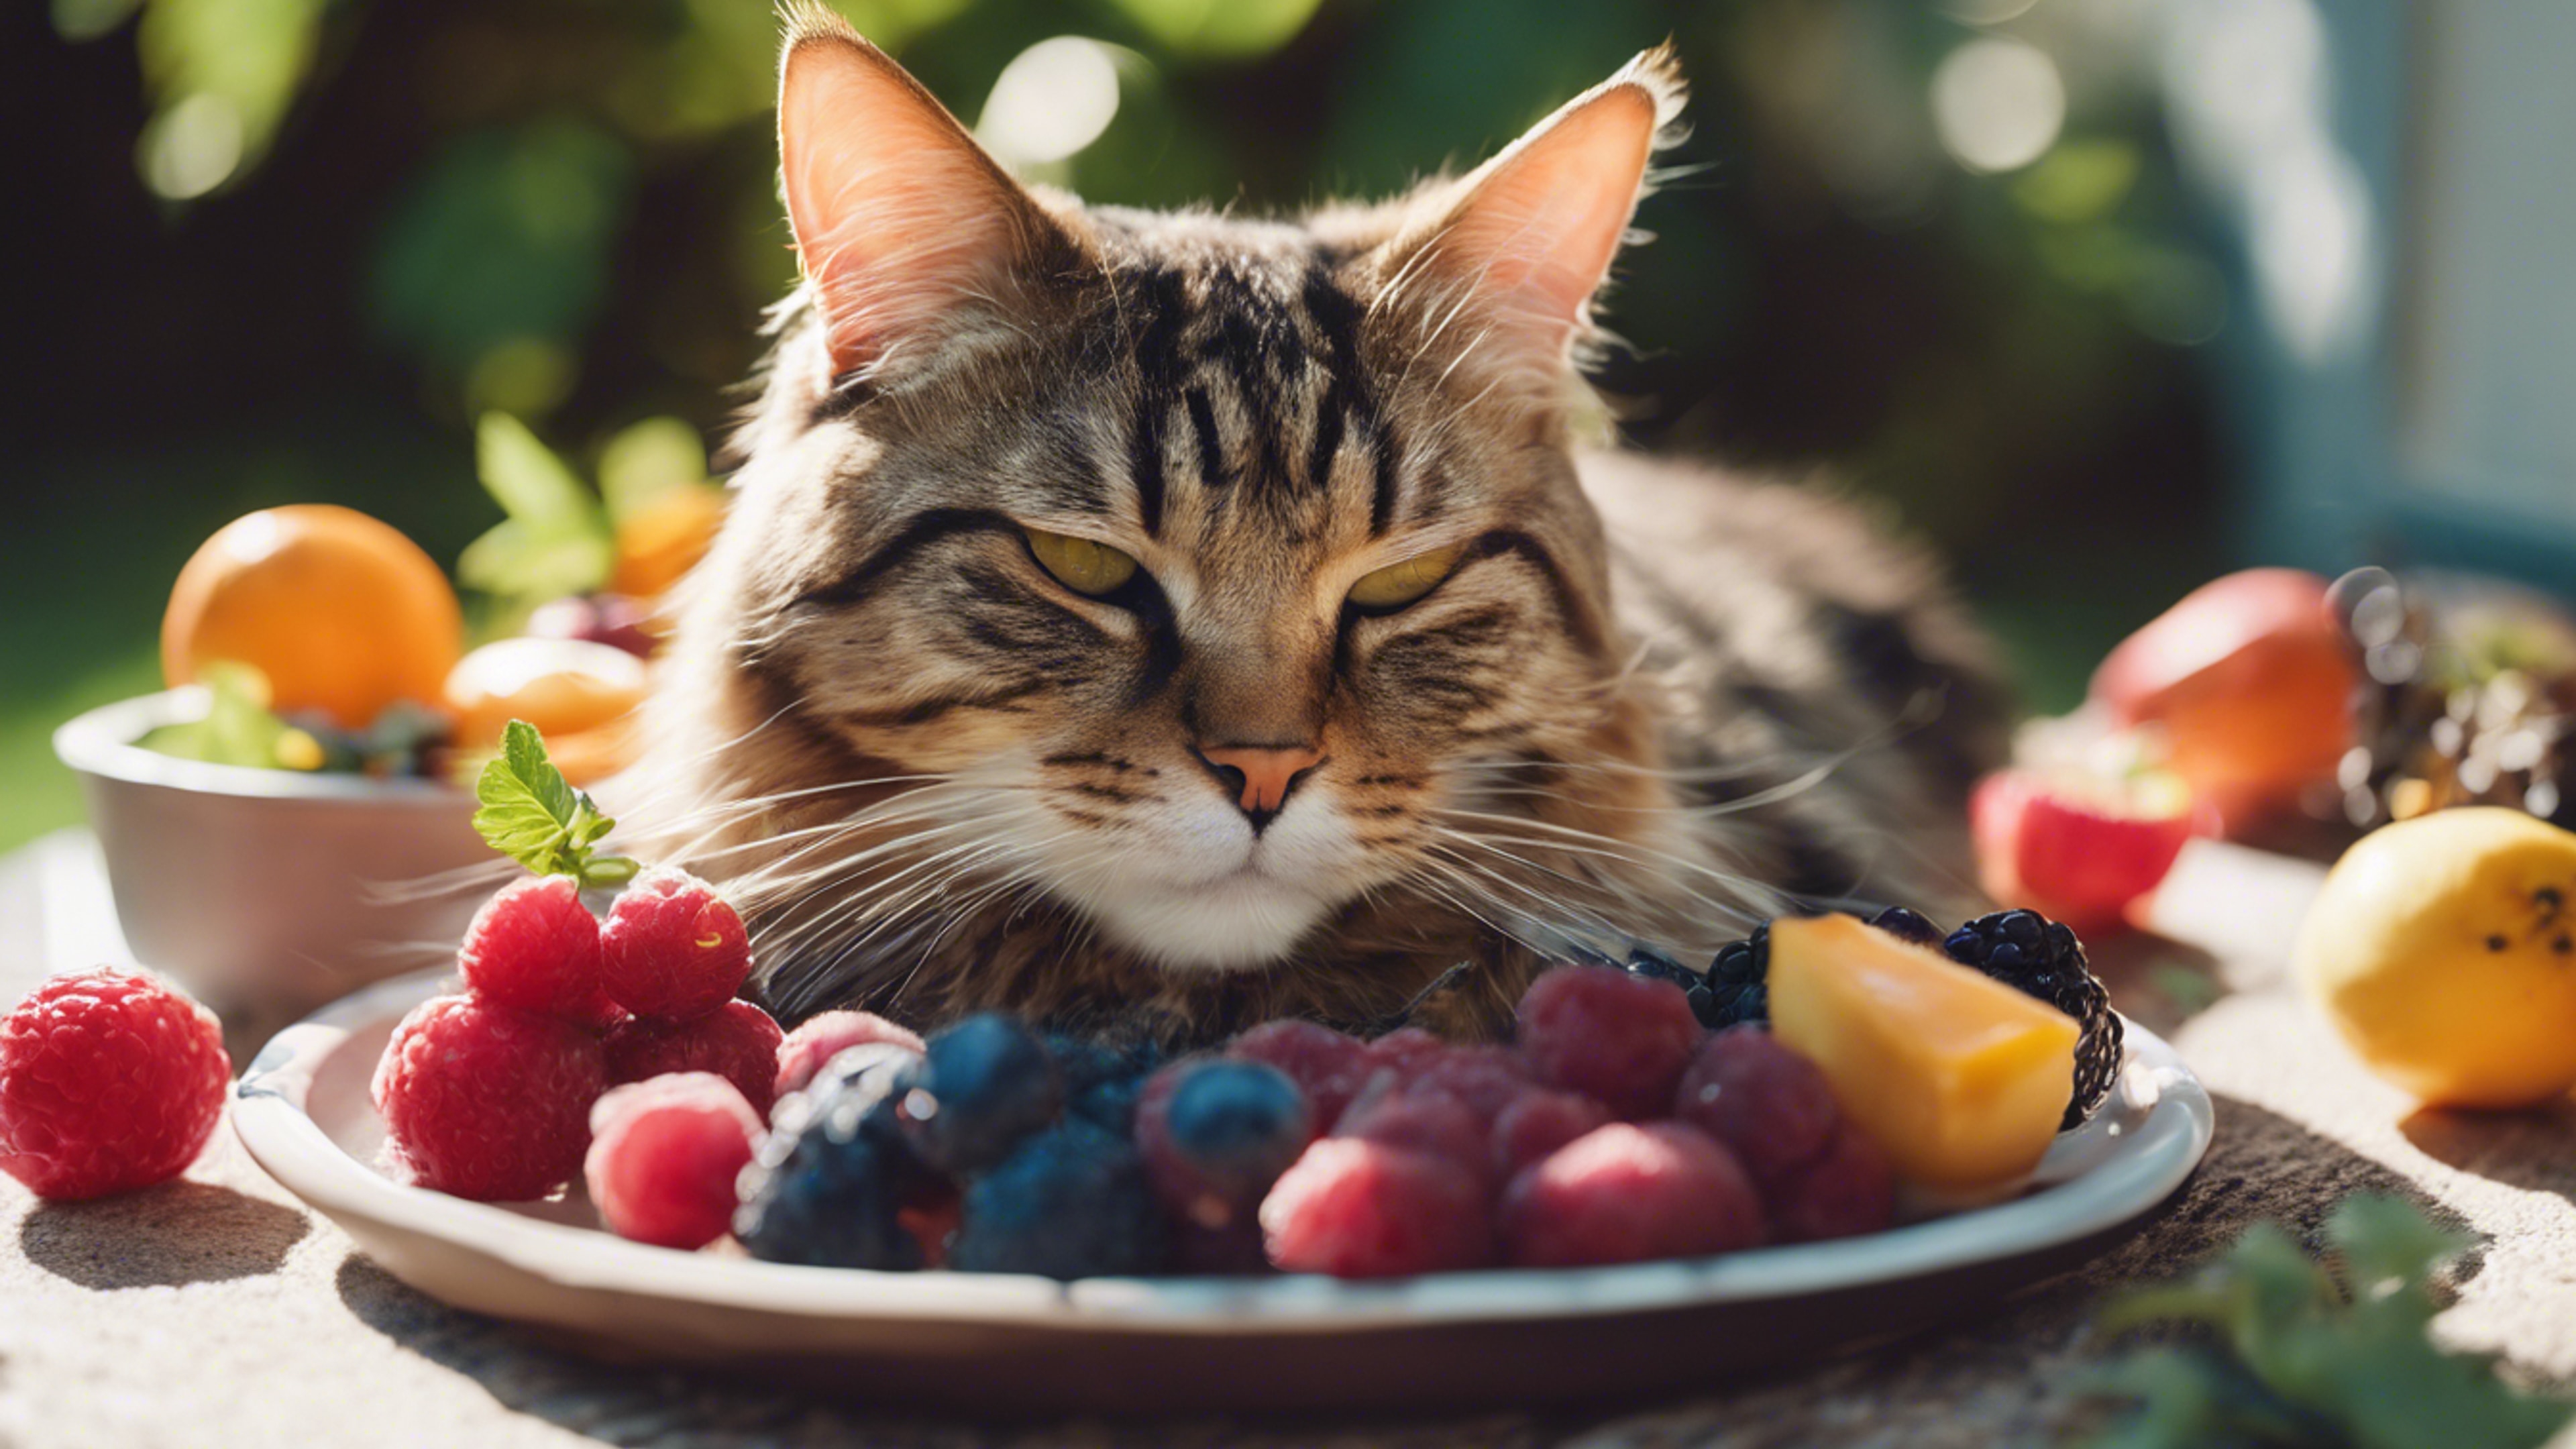 A sleepy Maine Coon cat relaxing next to a bowl of vibrant summer fruits. Behang[5a3905f0581c45108121]